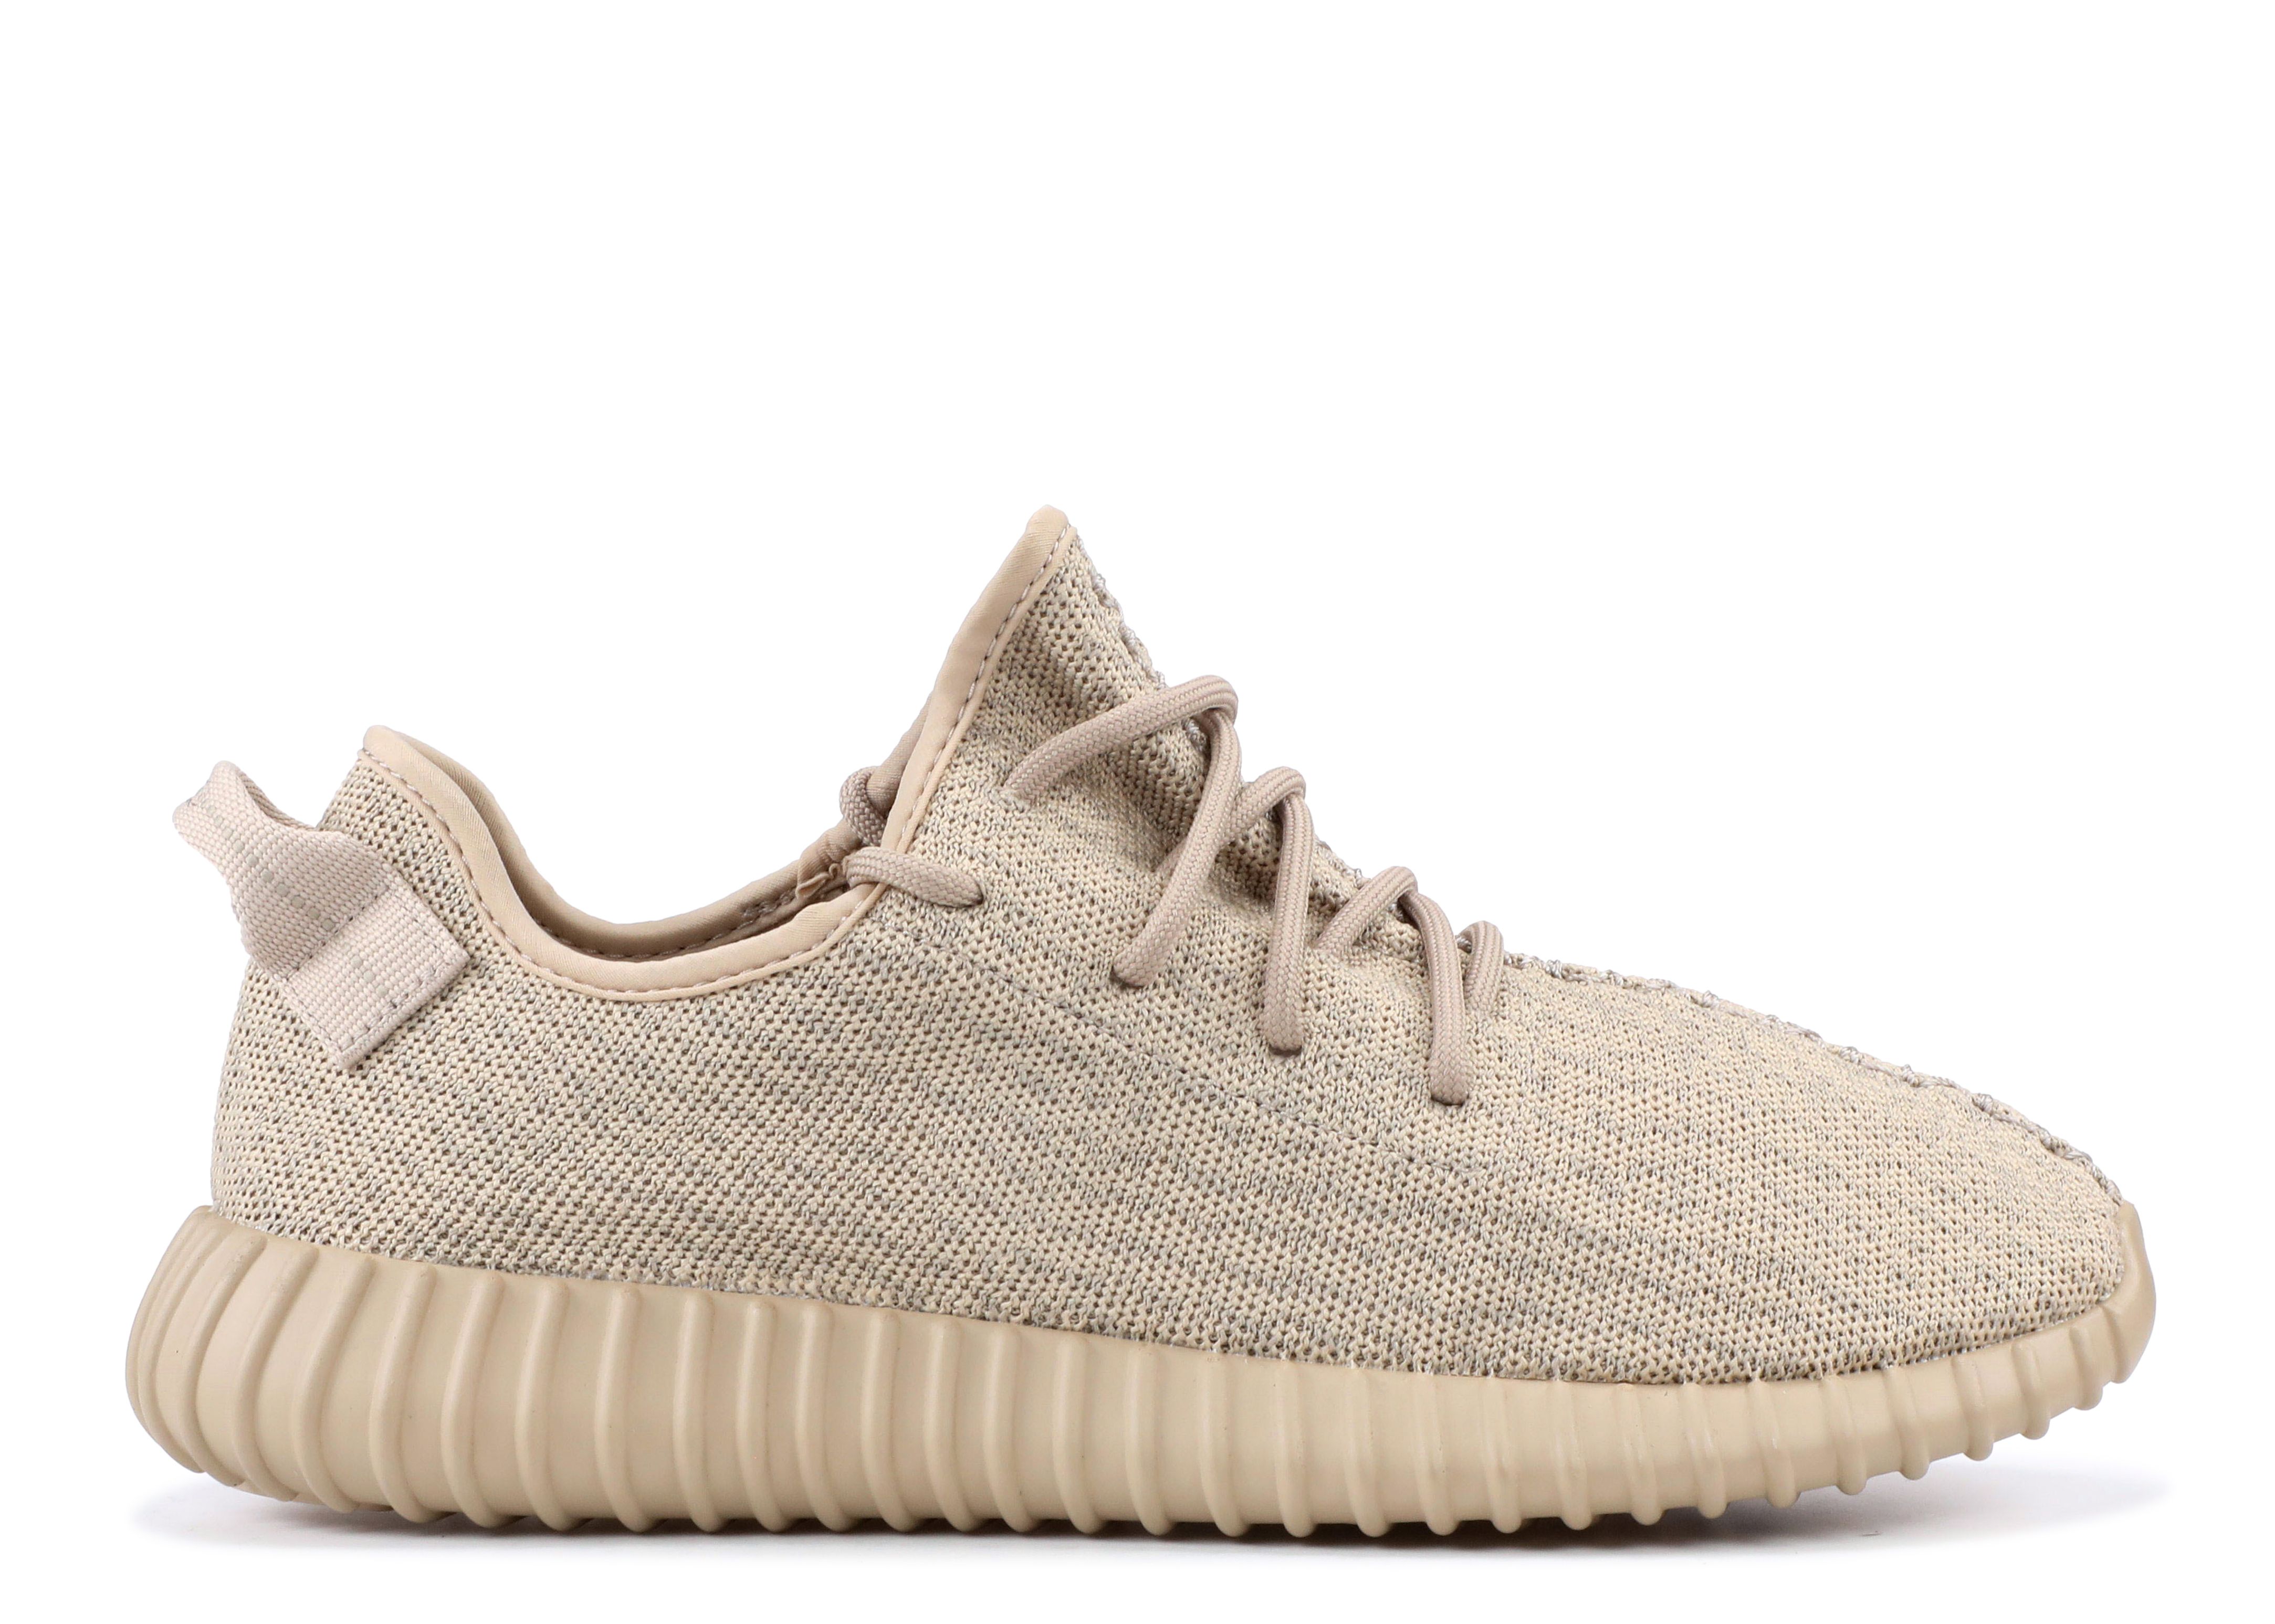 life ugly Variety Yeezy Boost 350 'Oxford Tan' - Adidas - AQ2661 - light stone/oxford tan/light  stone | Flight Club